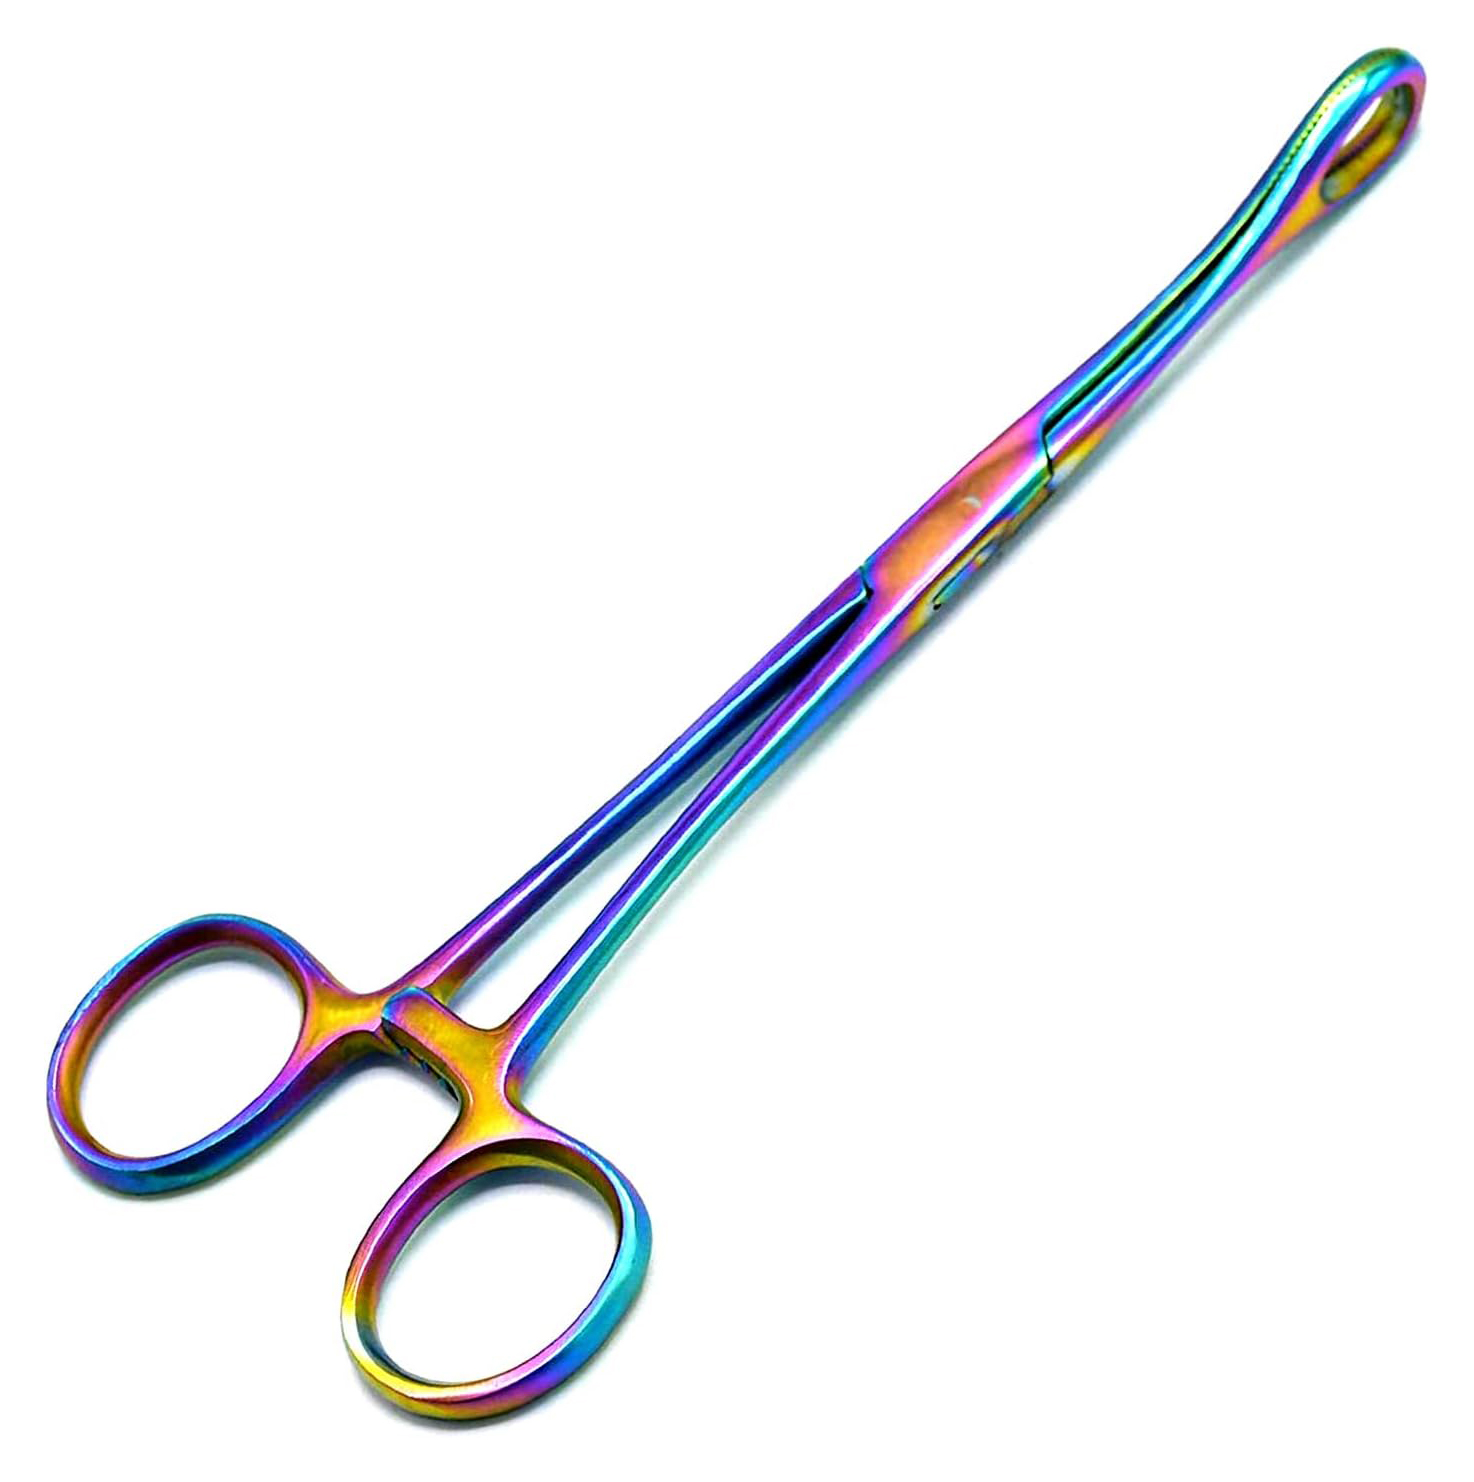 Foerster Sponge Forceps Straight and Curved Hemostat Clamp